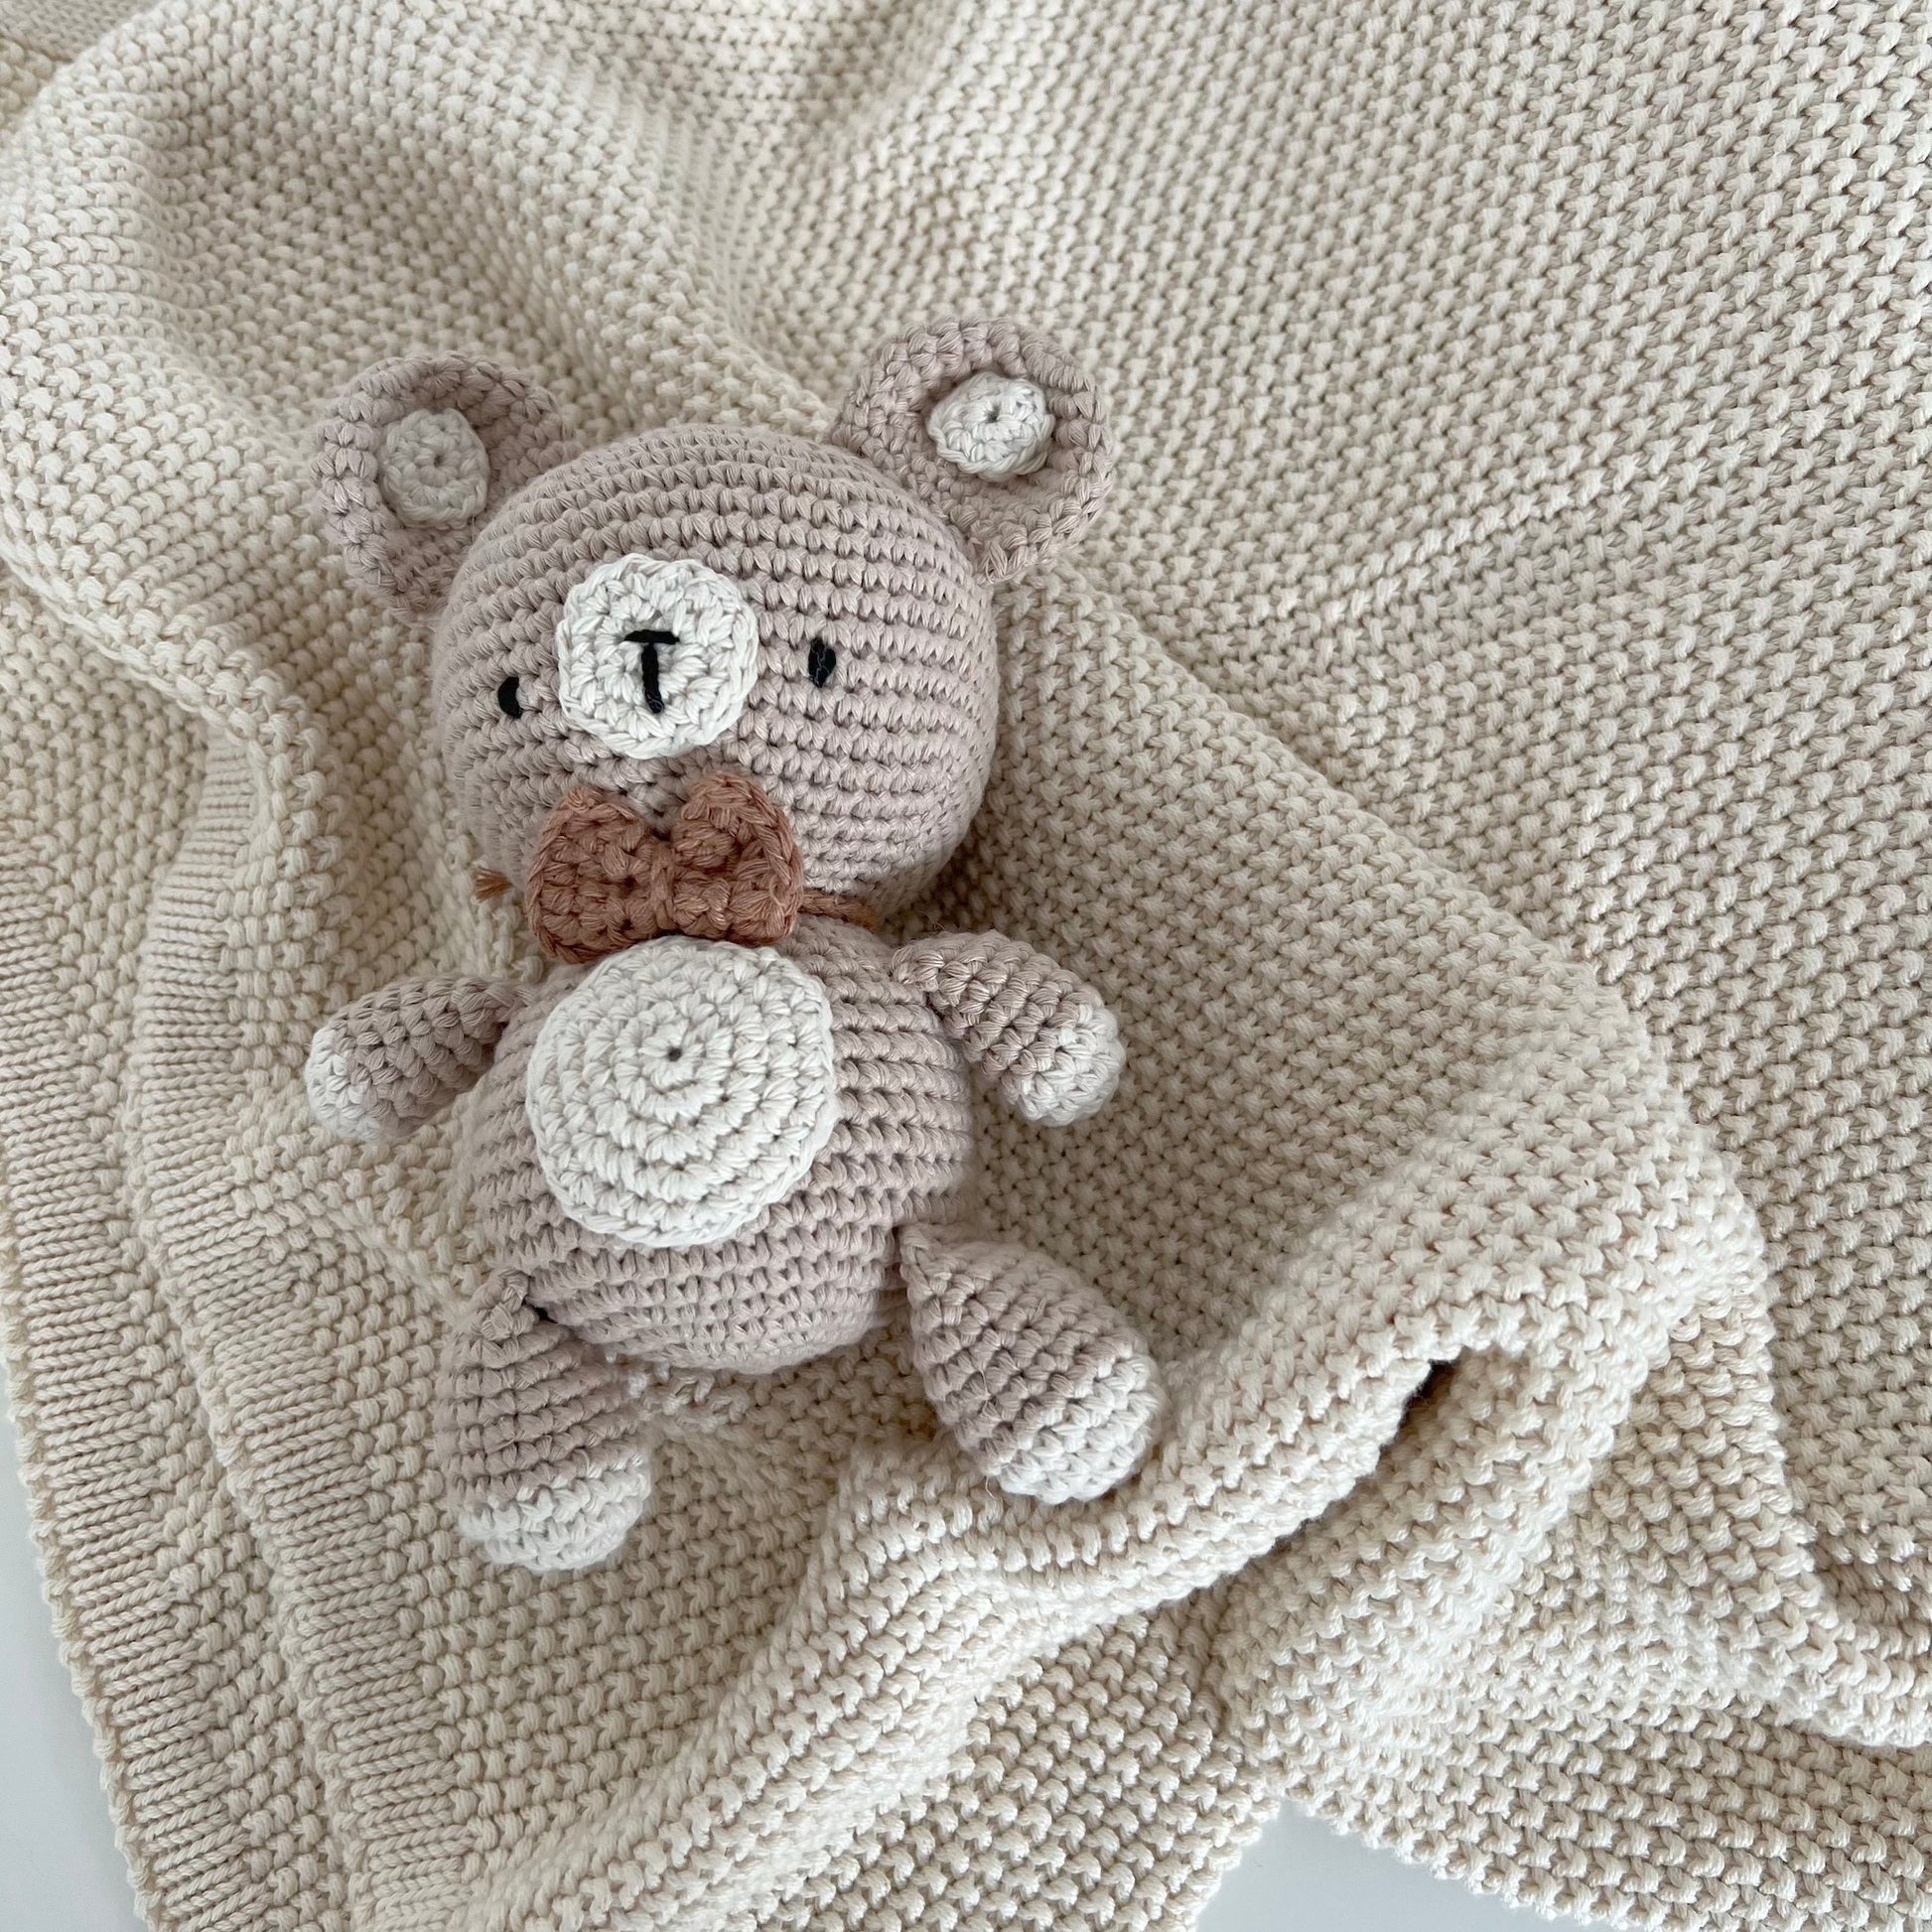 Big Little Baby Kit Knotted Lovey Crochet Baby PATTERN 